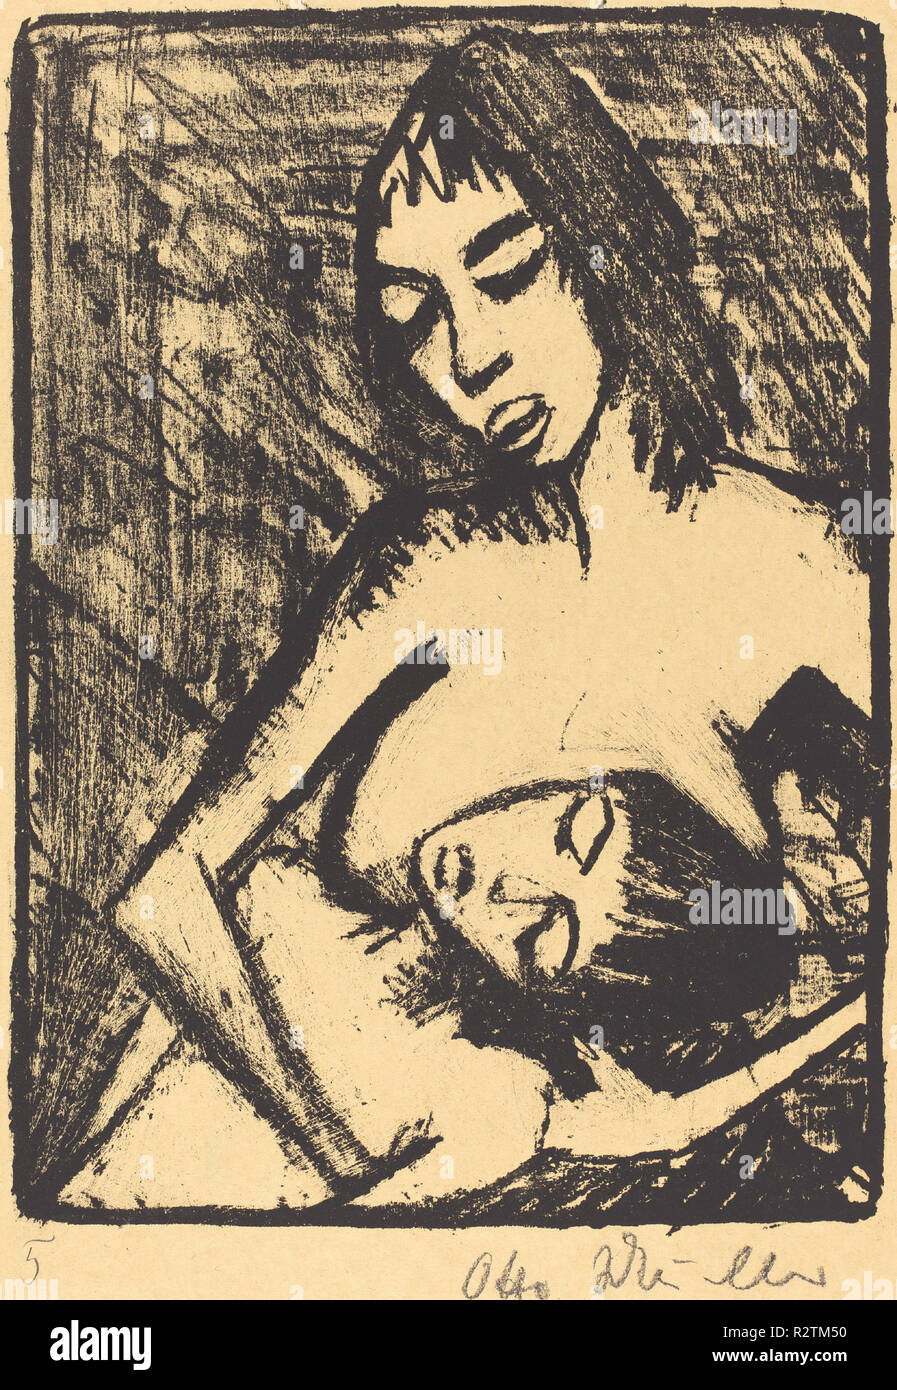 Mother and Child (Mutter und Kind). Dated: probably 1920. Medium: lithograph. Museum: National Gallery of Art, Washington DC. Author: Otto Müller. Stock Photo